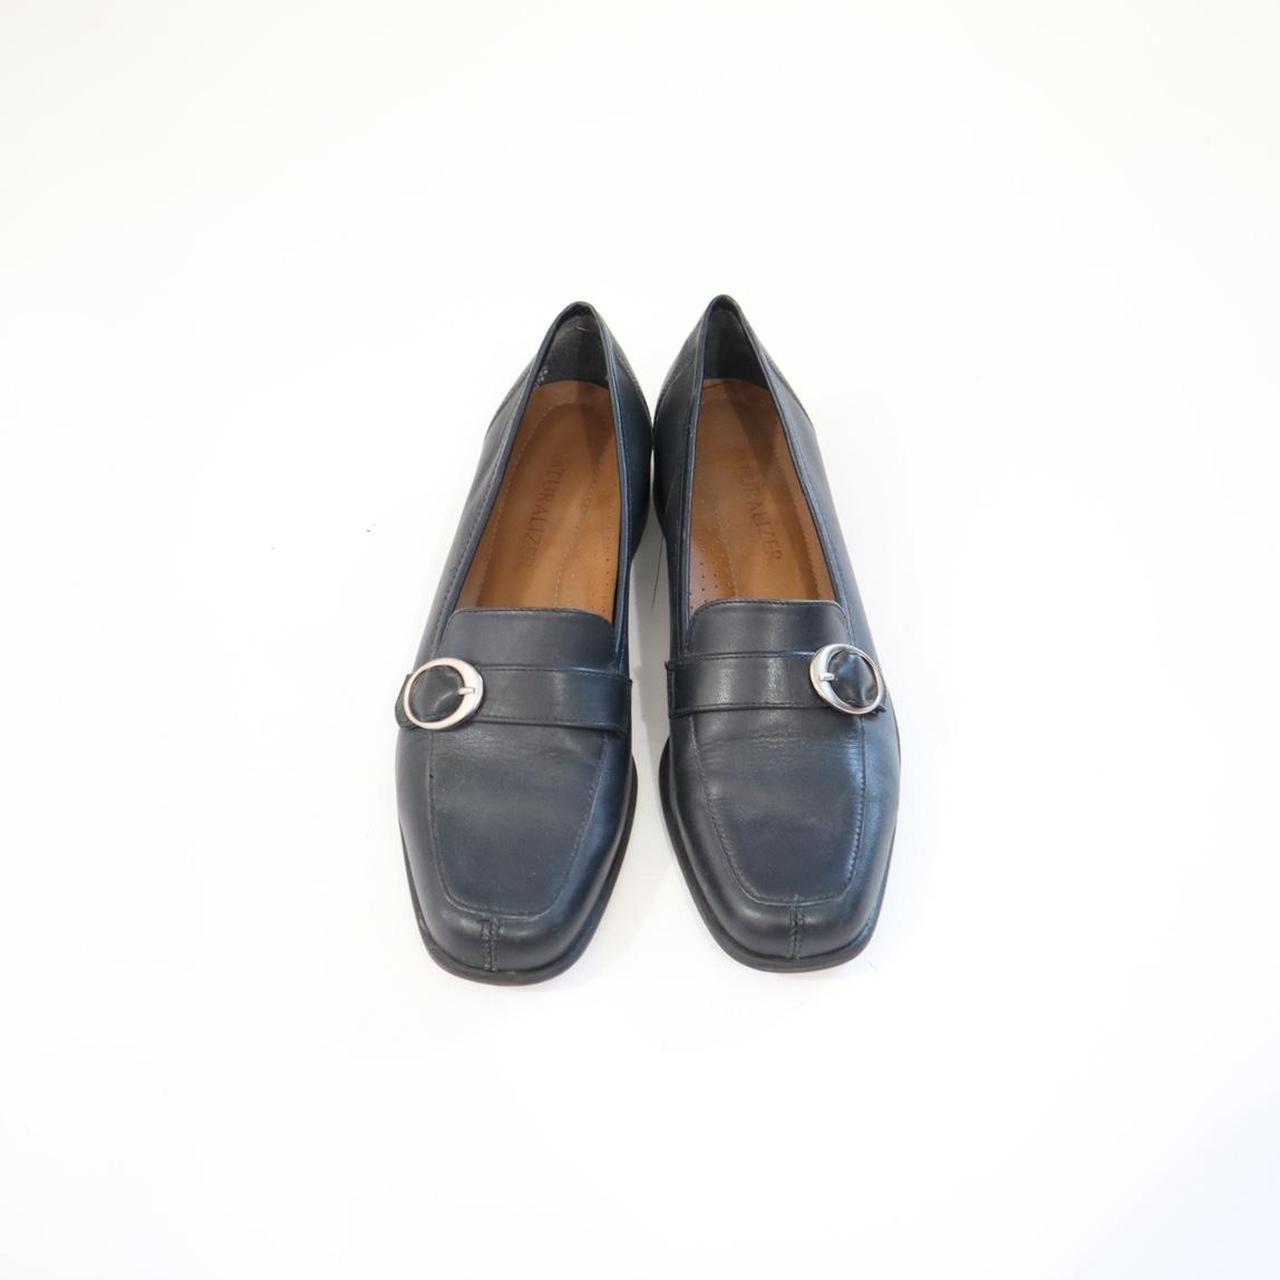 Navy blue loafers Perfect work smart business casual... - Depop